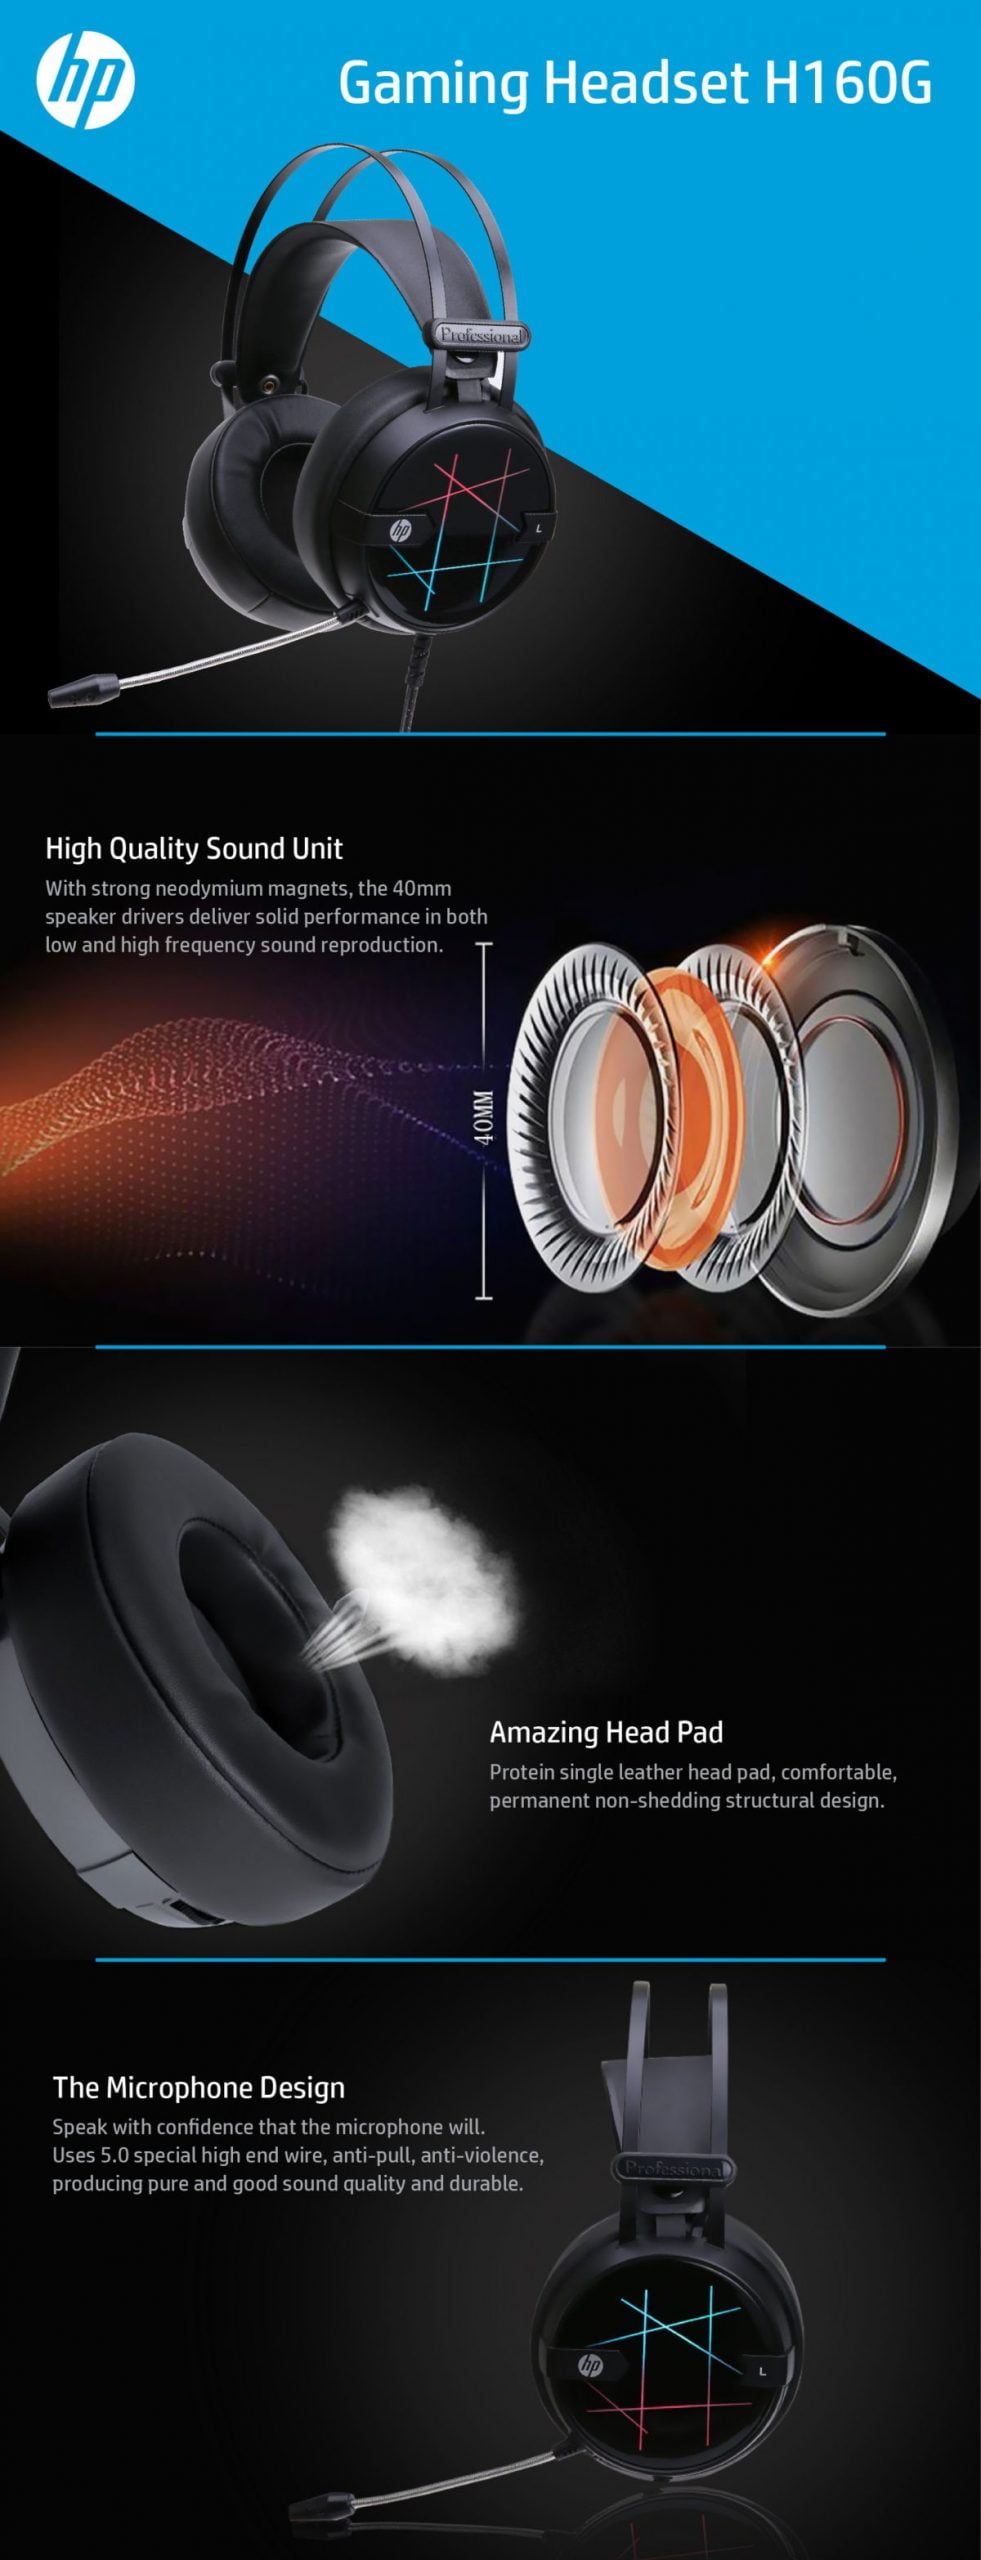 High Quality Sound Unit With strong neodymium magnets, the 40mm speaker drivers deliver solid performance in both low and high frequency sound reproduction.